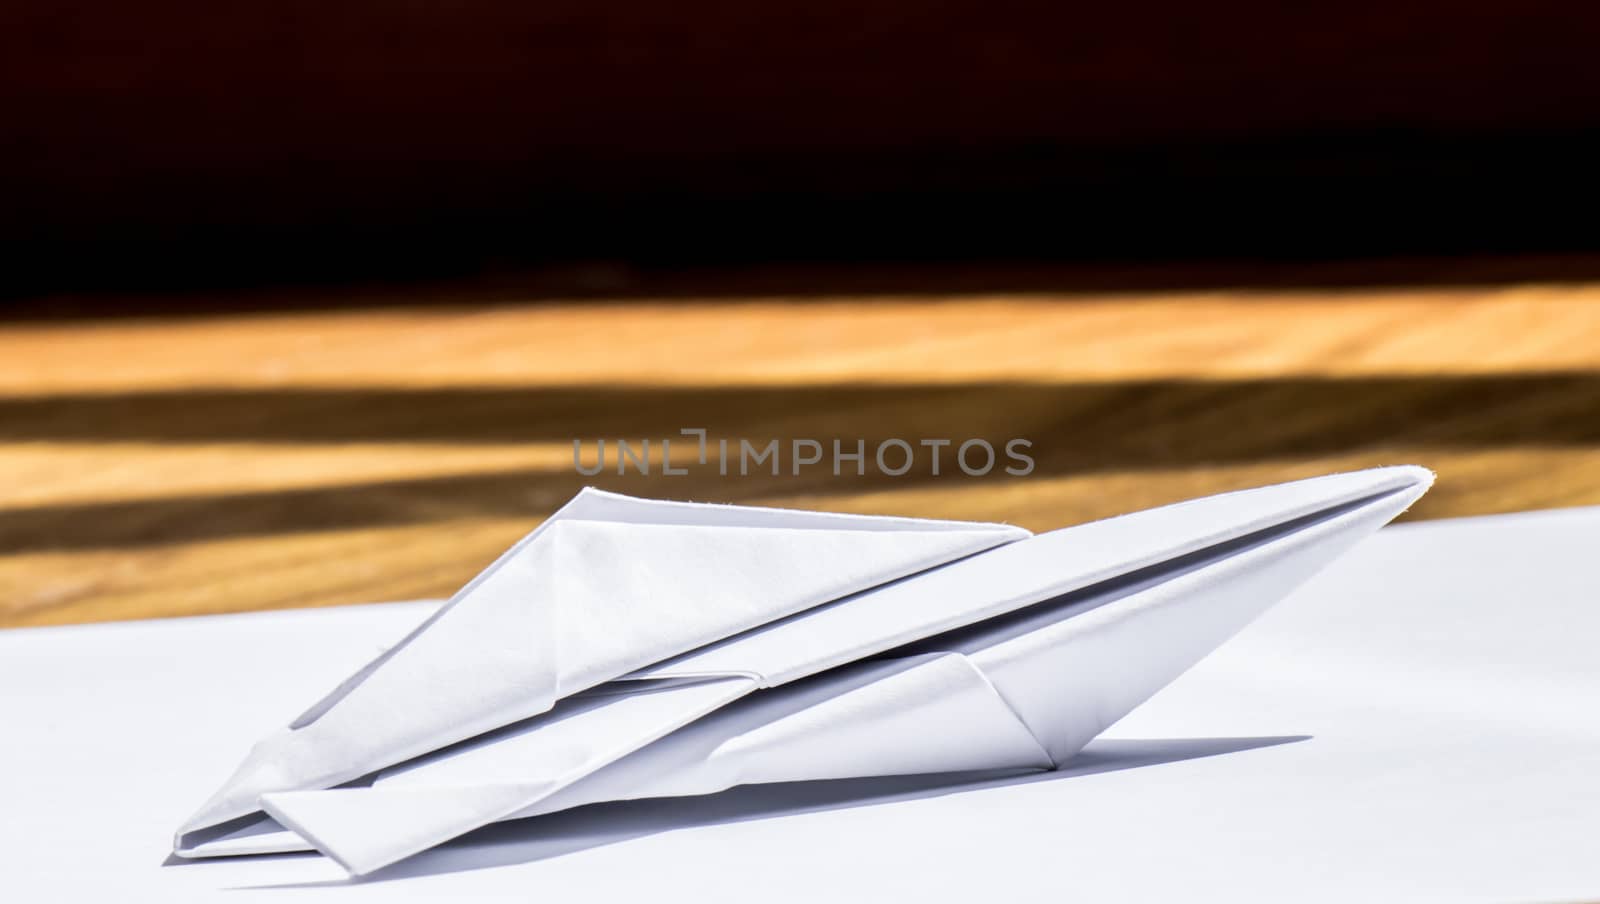 A nice origami speedboat over a sheet of paper and wood background